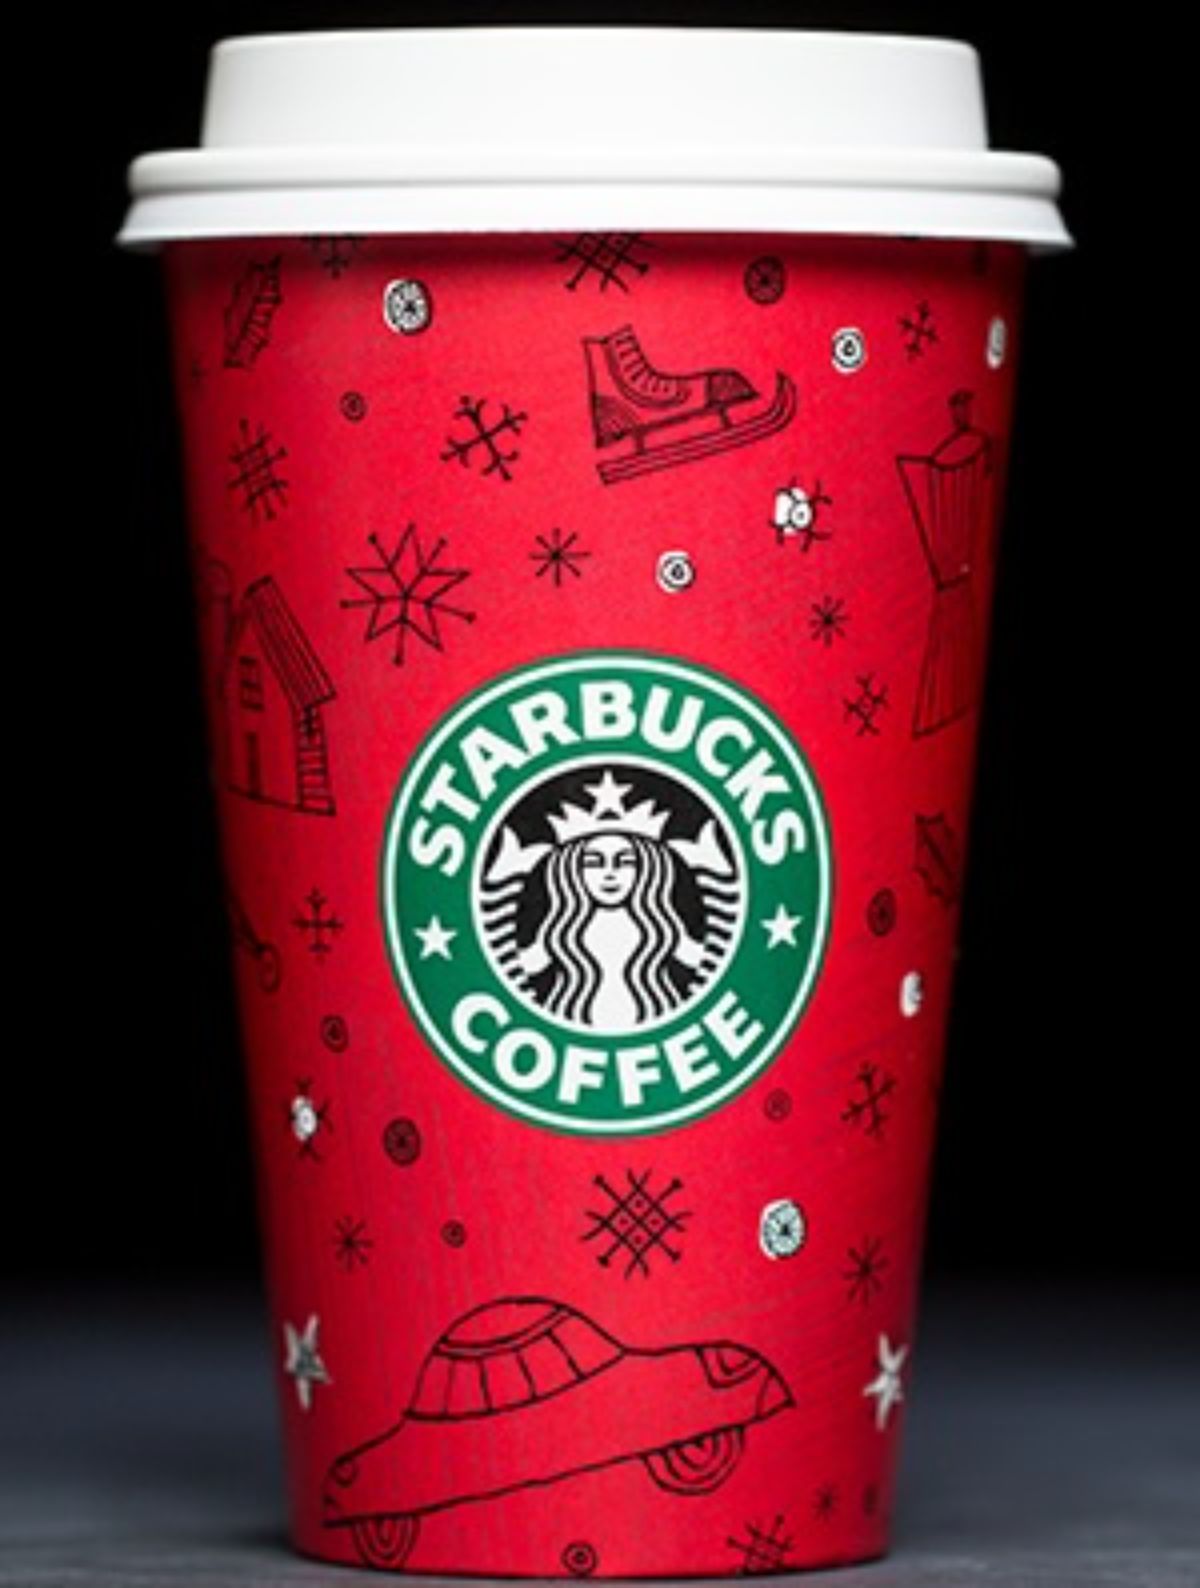 1999 starbucks holiday cup in red with doodles